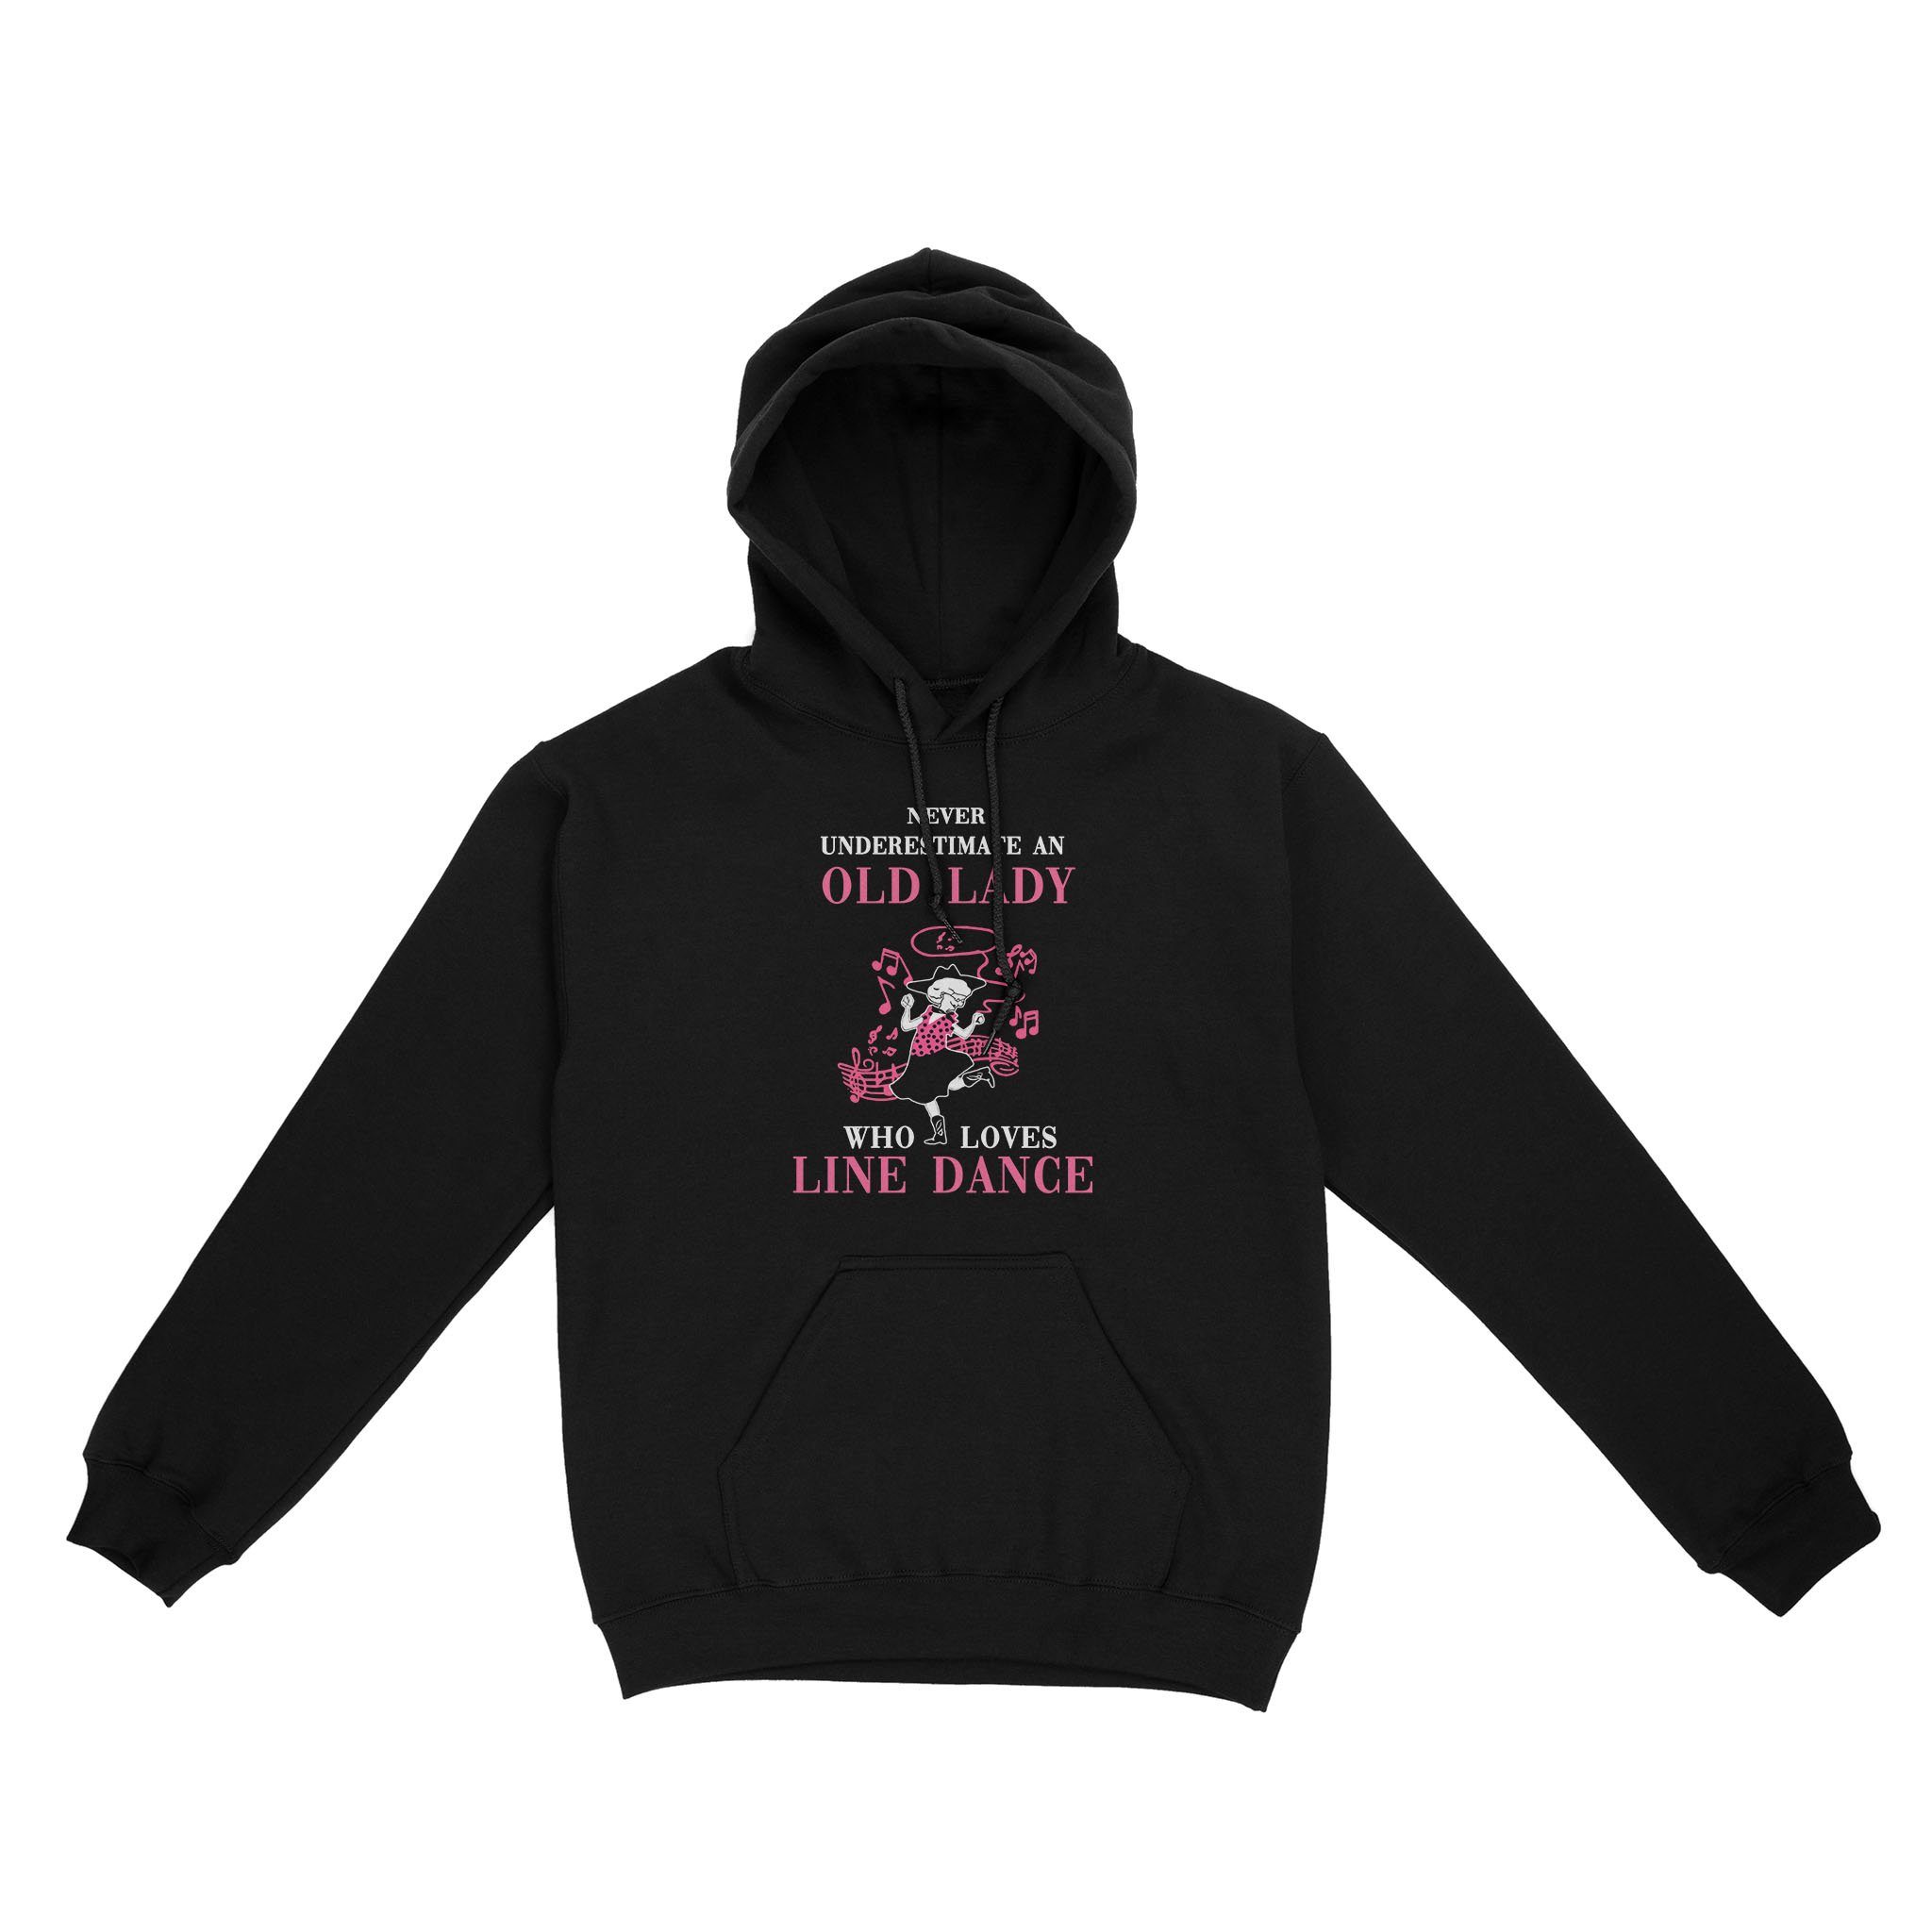 Never Underestimate Old Lady Who Loves Line Dance – Standard Hoodie